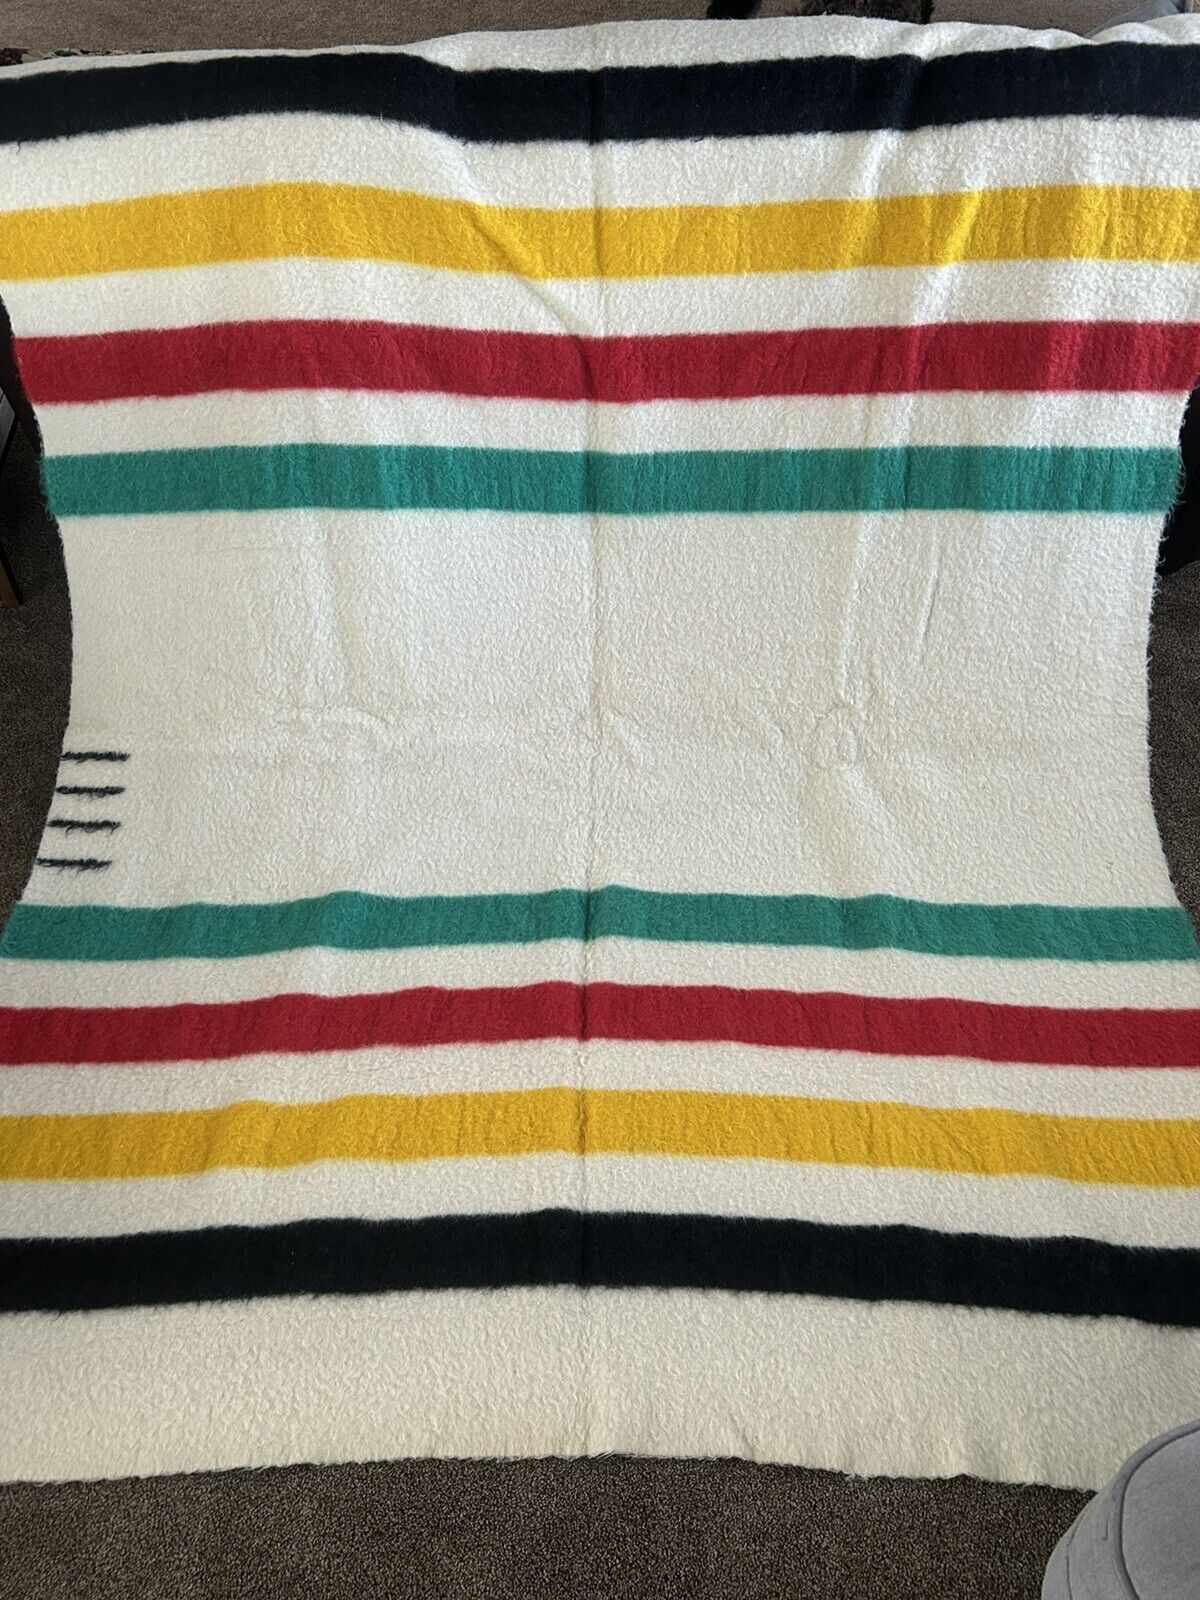 RARE Hudson's Bay 4 Point Wool Blanket with RED Label - Scroll B, c1930